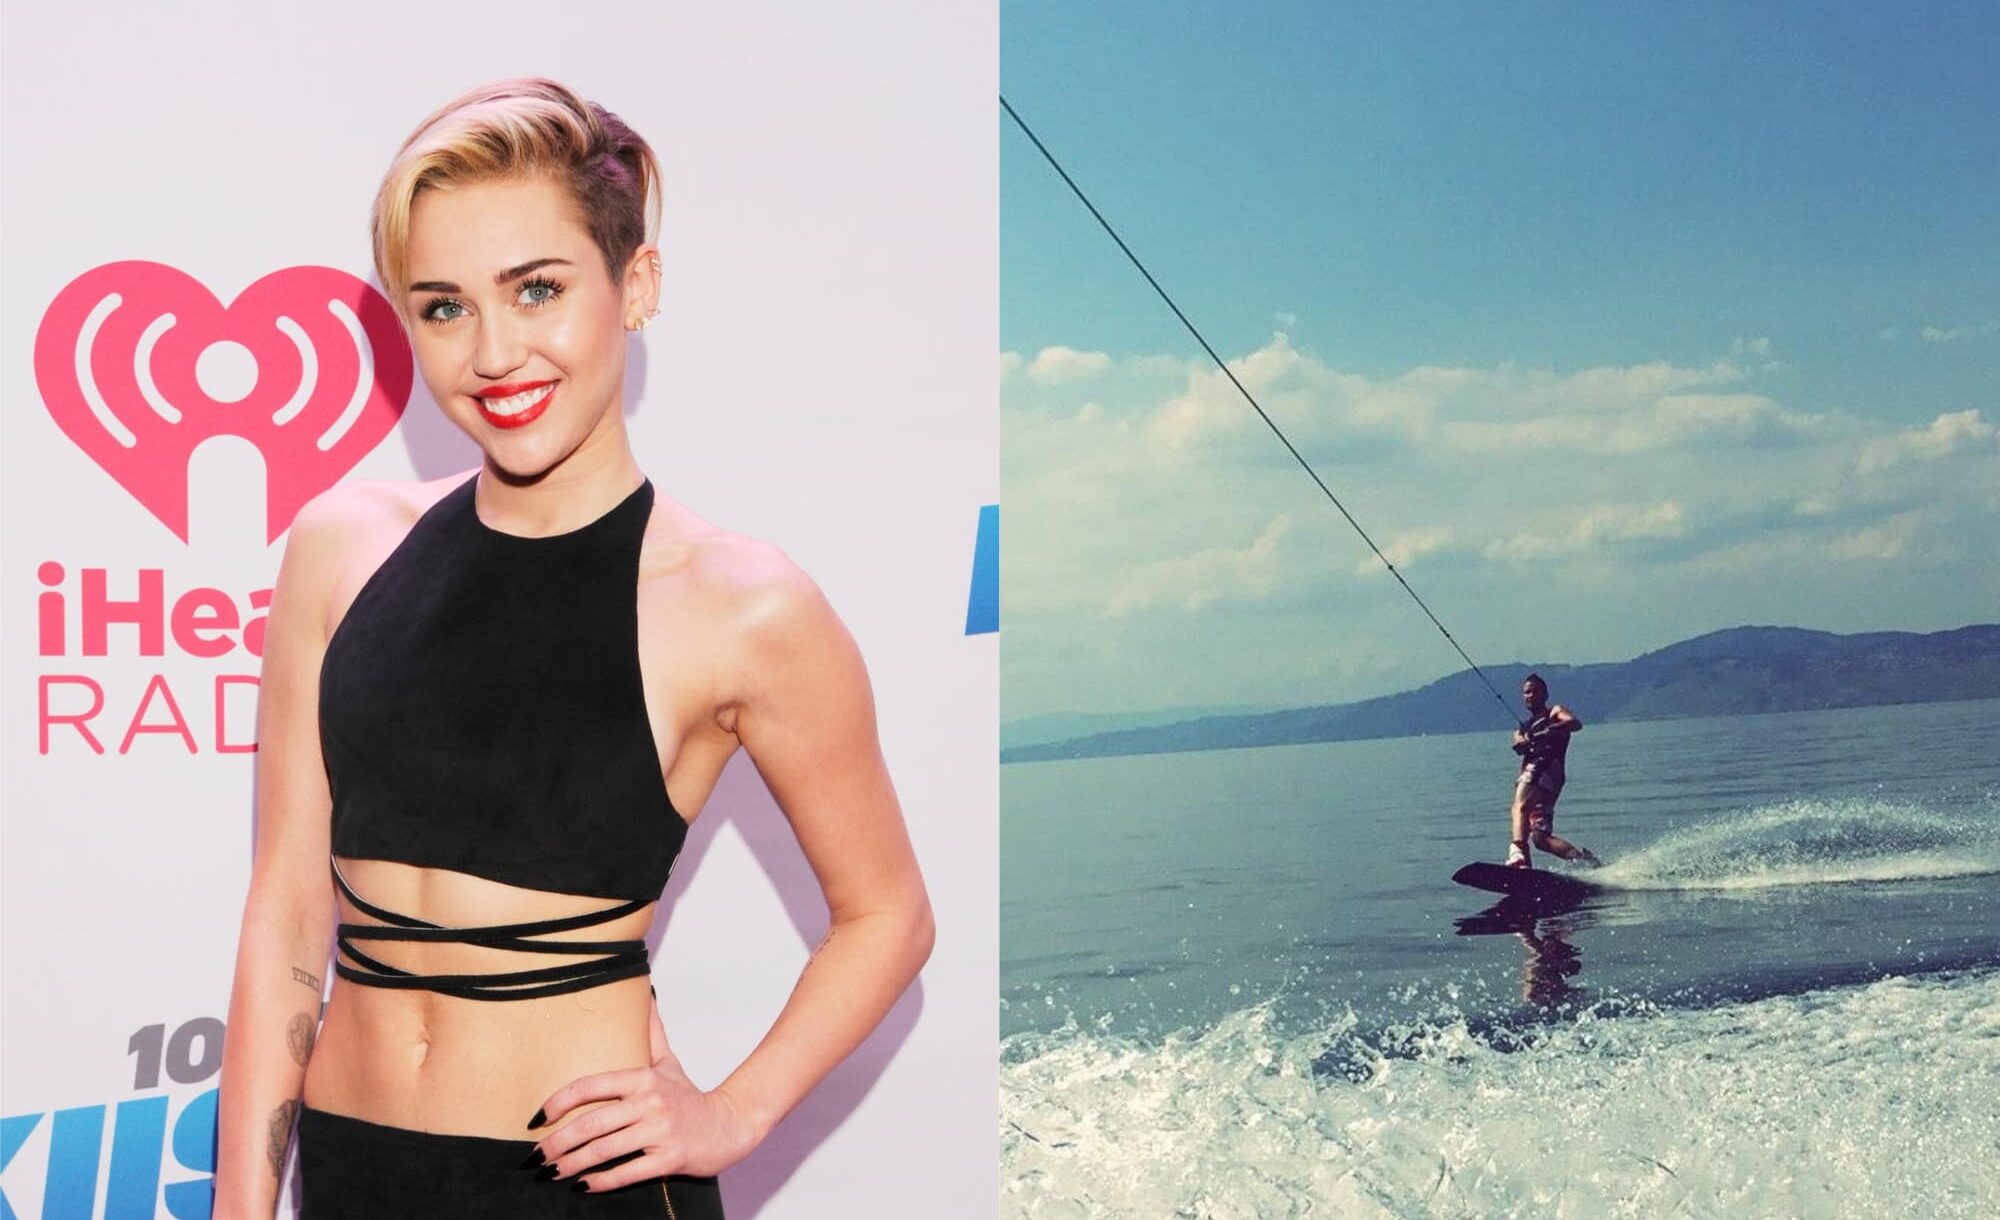 Miley cyrus wakeboarding e1624969568705